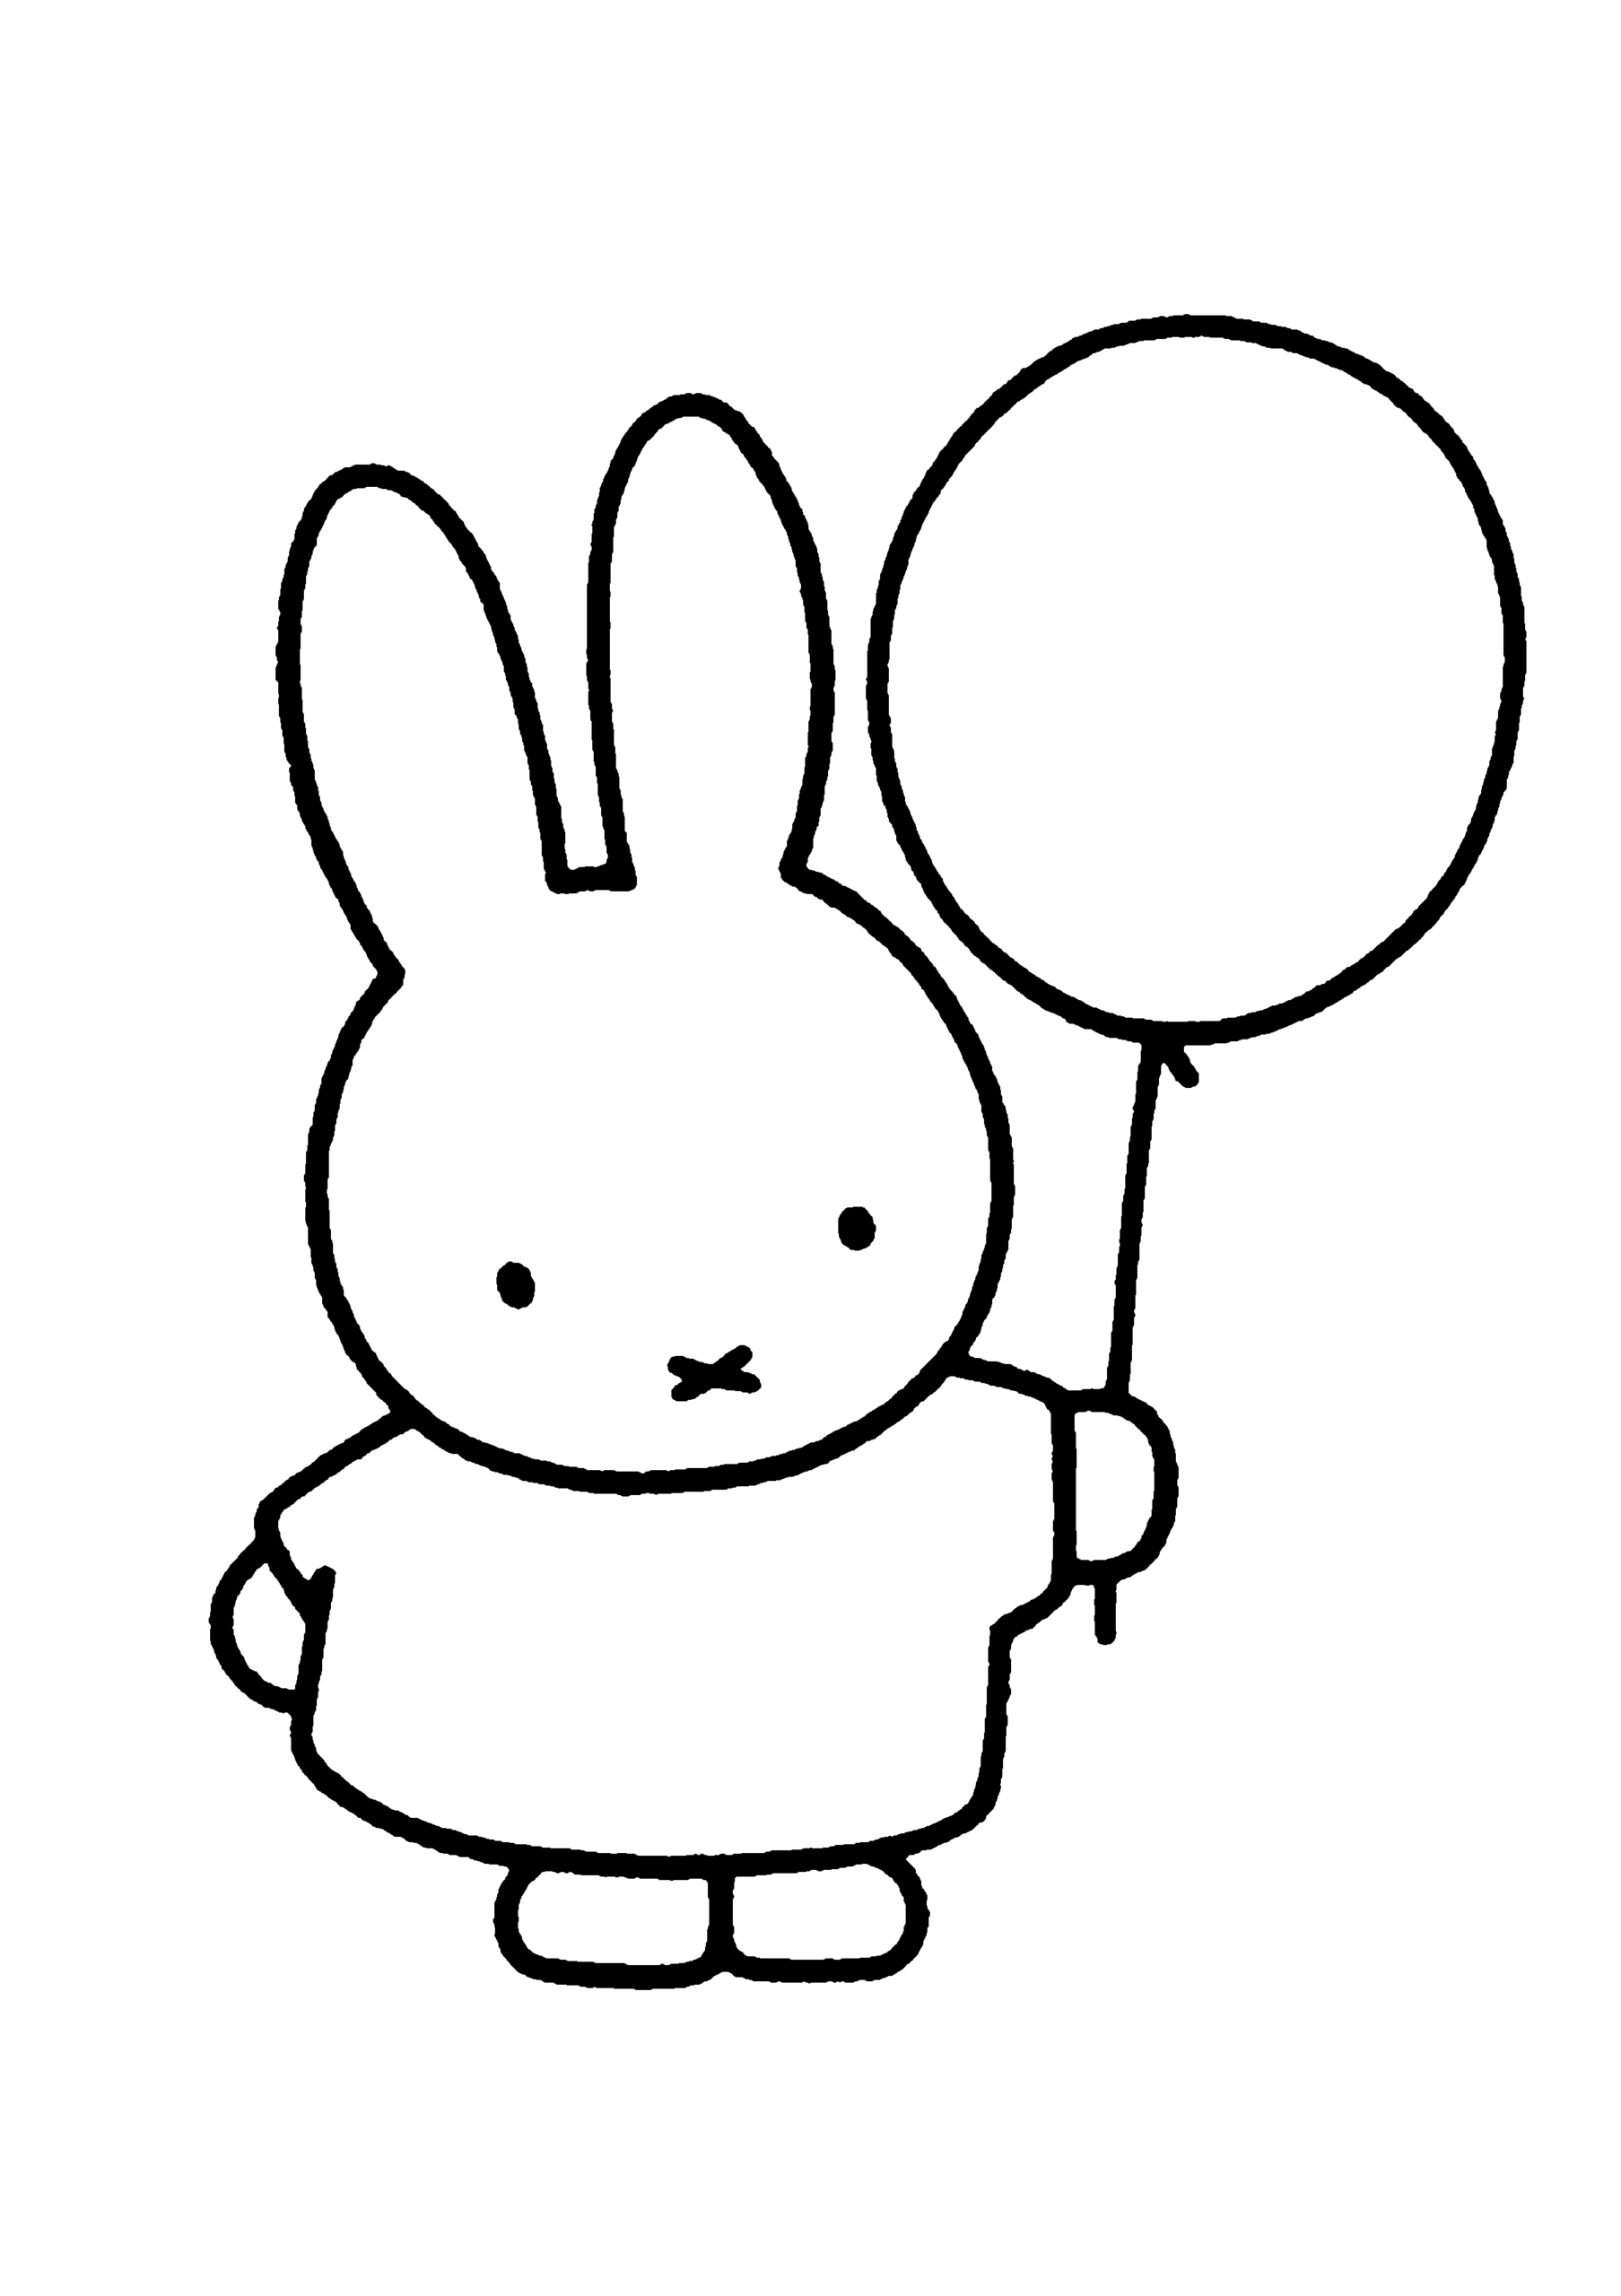 Balloons Coloring Pages for Kids Bunny Balloon Printable 2021 036 Coloring4free